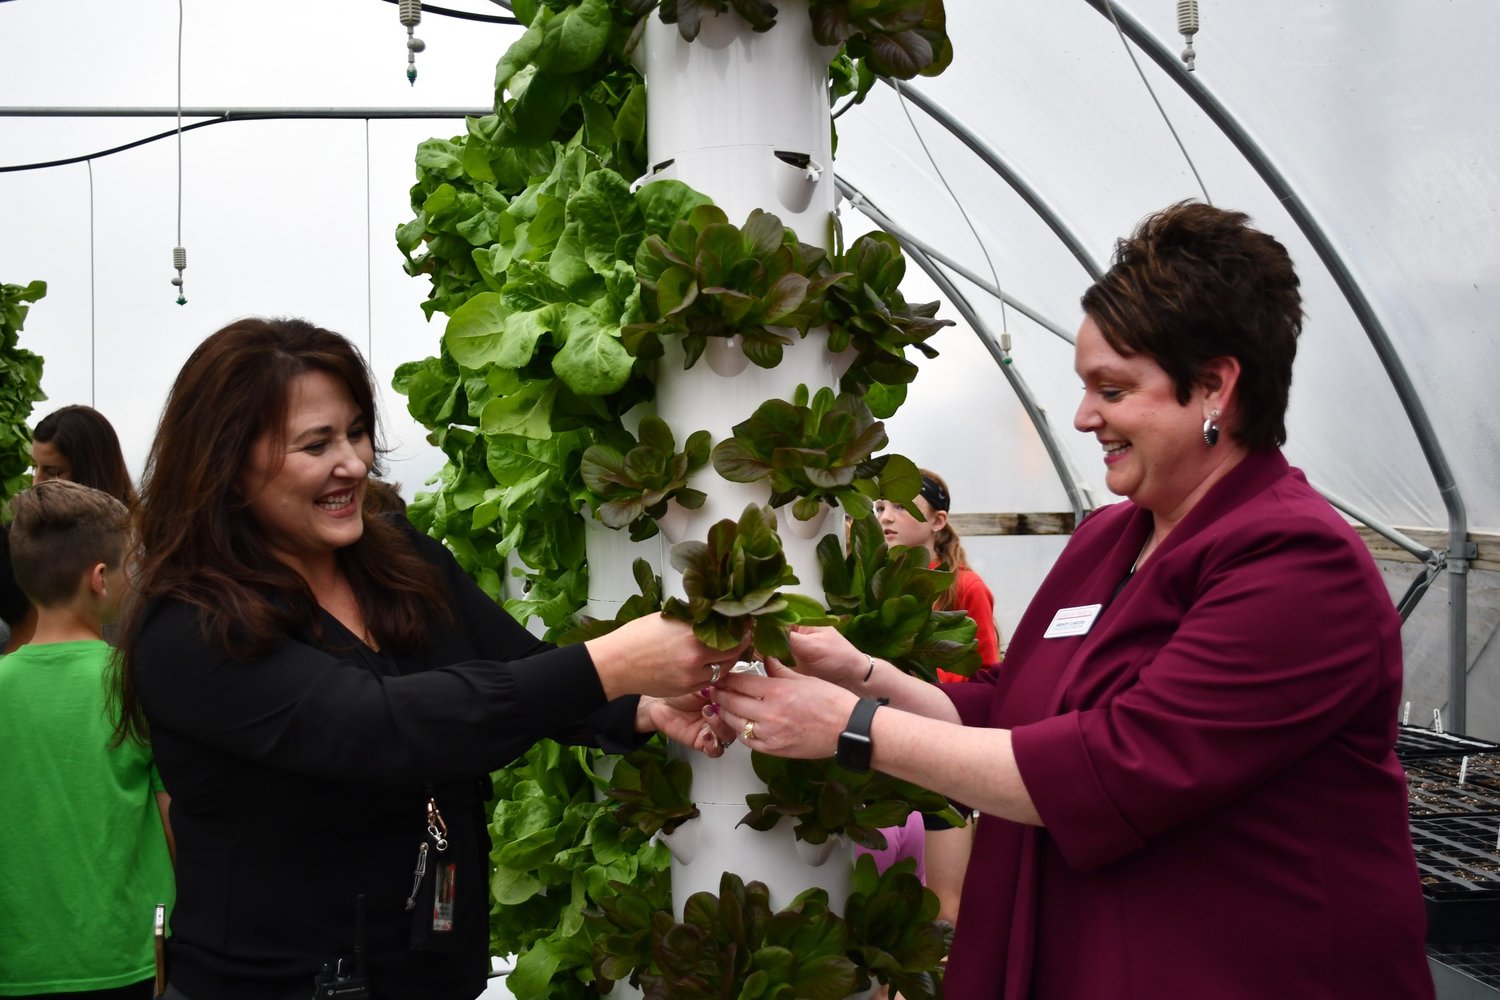 The John Thomas School of Discovery is expanding its tower gardens initiative with the funding.